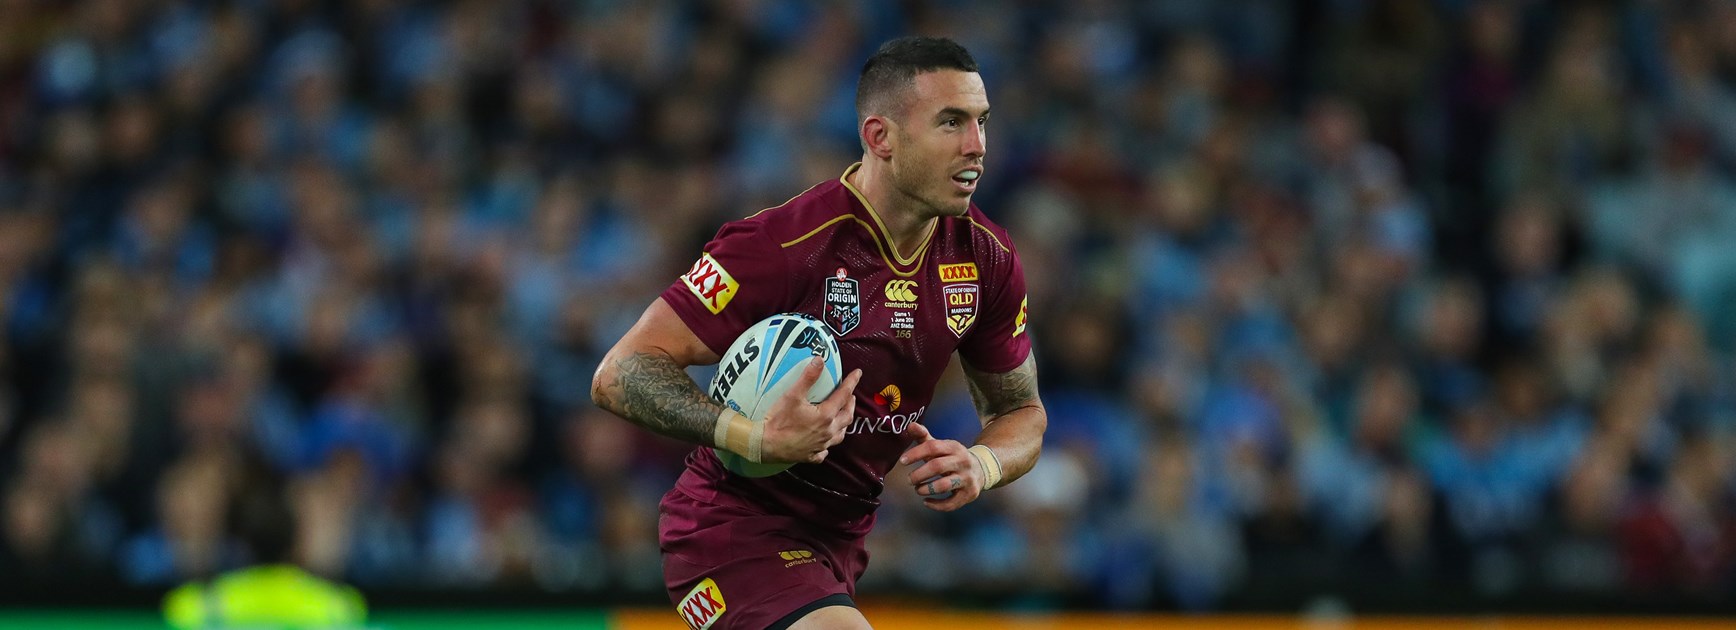 Darius Boyd in action for the Maroons.